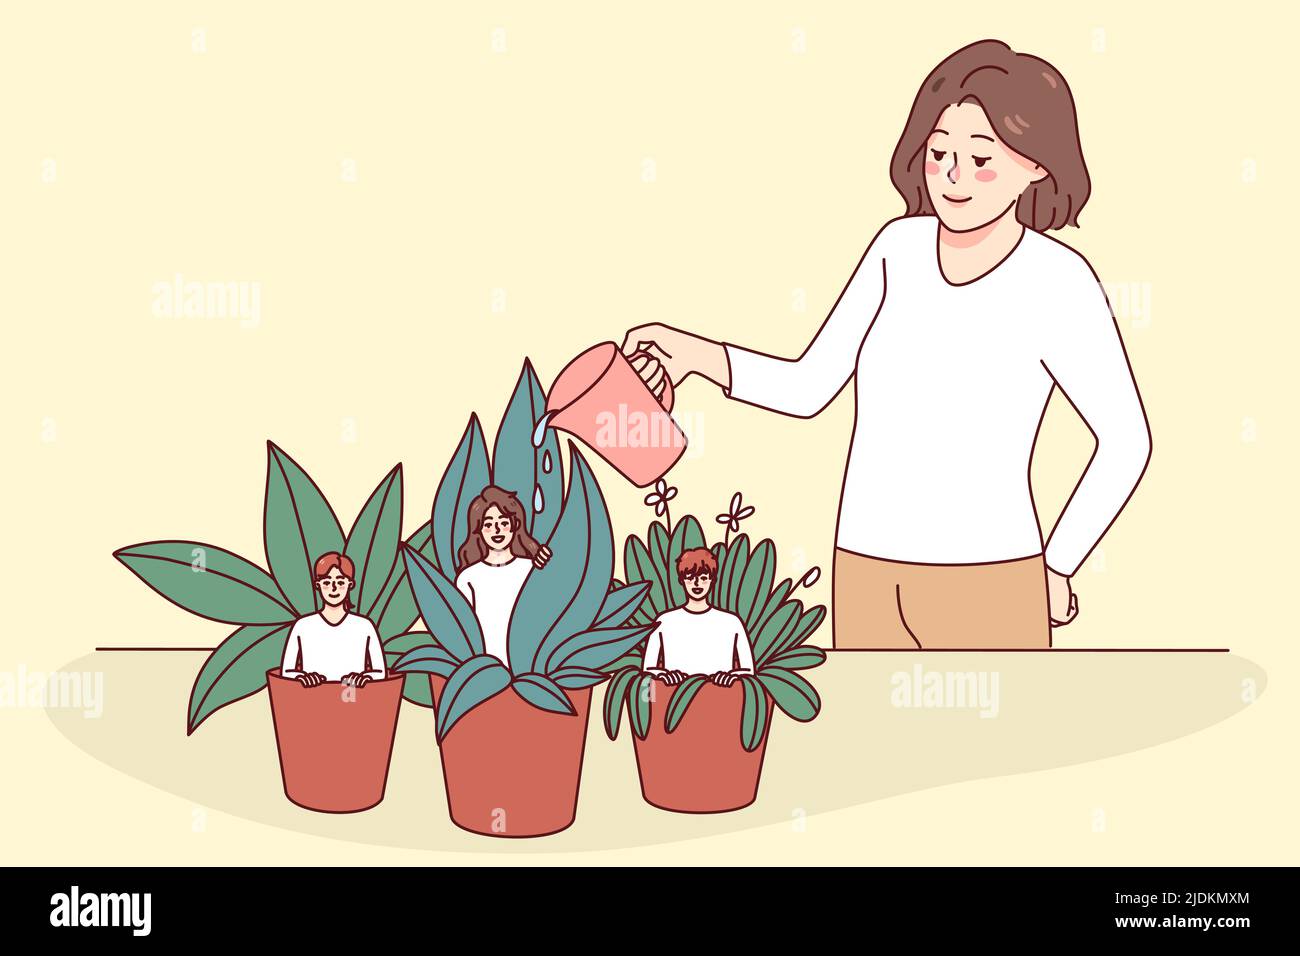 Employees sit in small pots and manager watering them. Boss or leader help workers to growth. Concept of mentorship and development. Vector illustration.  Stock Vector